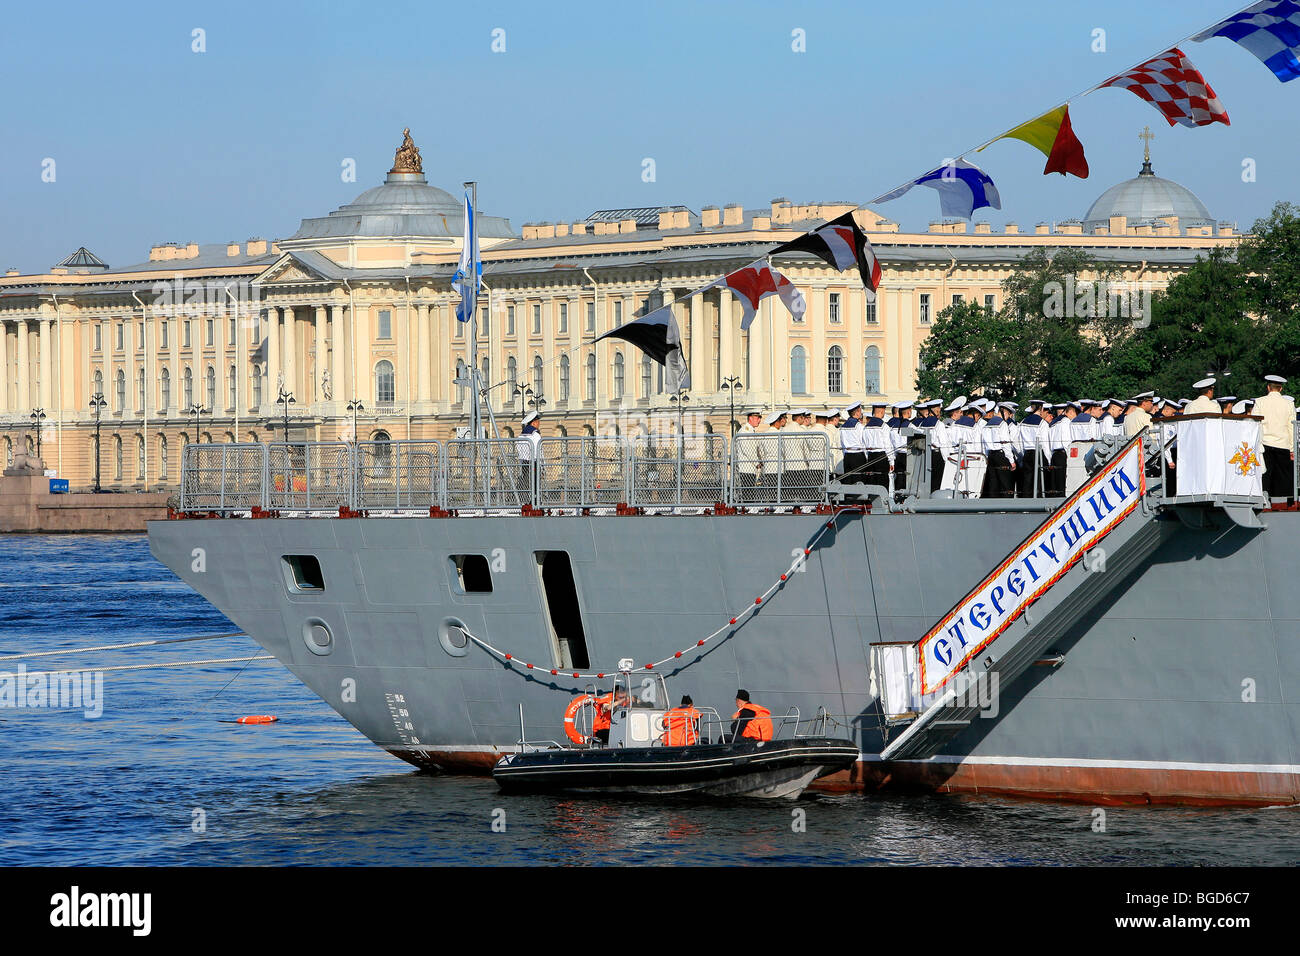 The Russian Corvette RFS 530 Steregushchy during a naval parade in Saint Petersburg, Russia Stock Photo